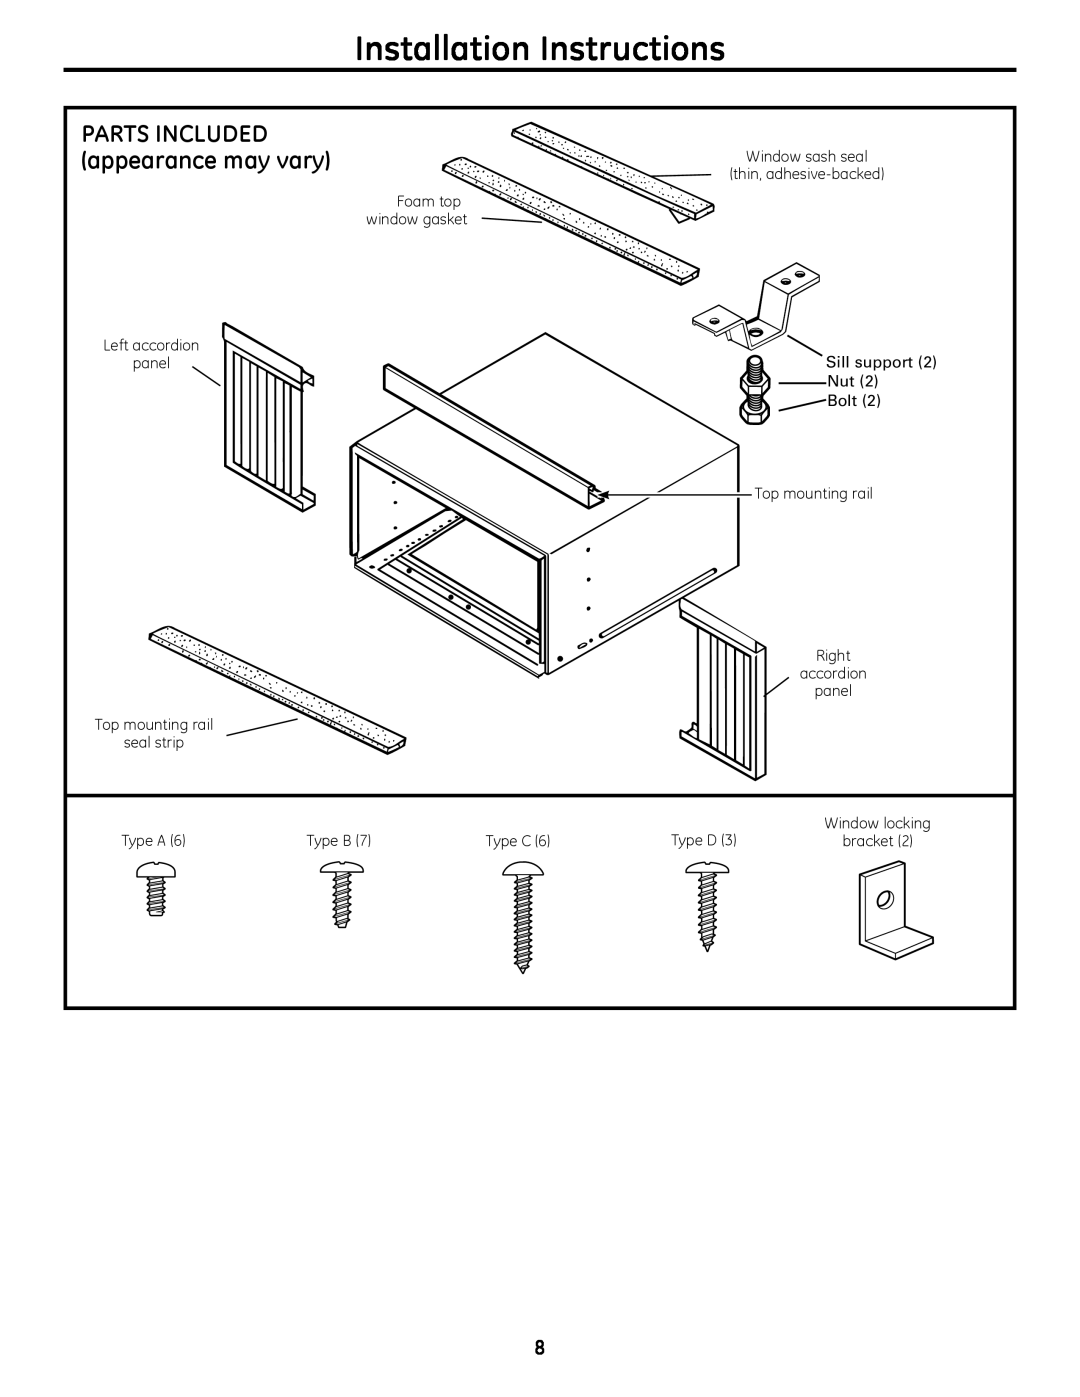 GE 880 installation instructions Installation Instructions, Parts Included, appearance may vary 